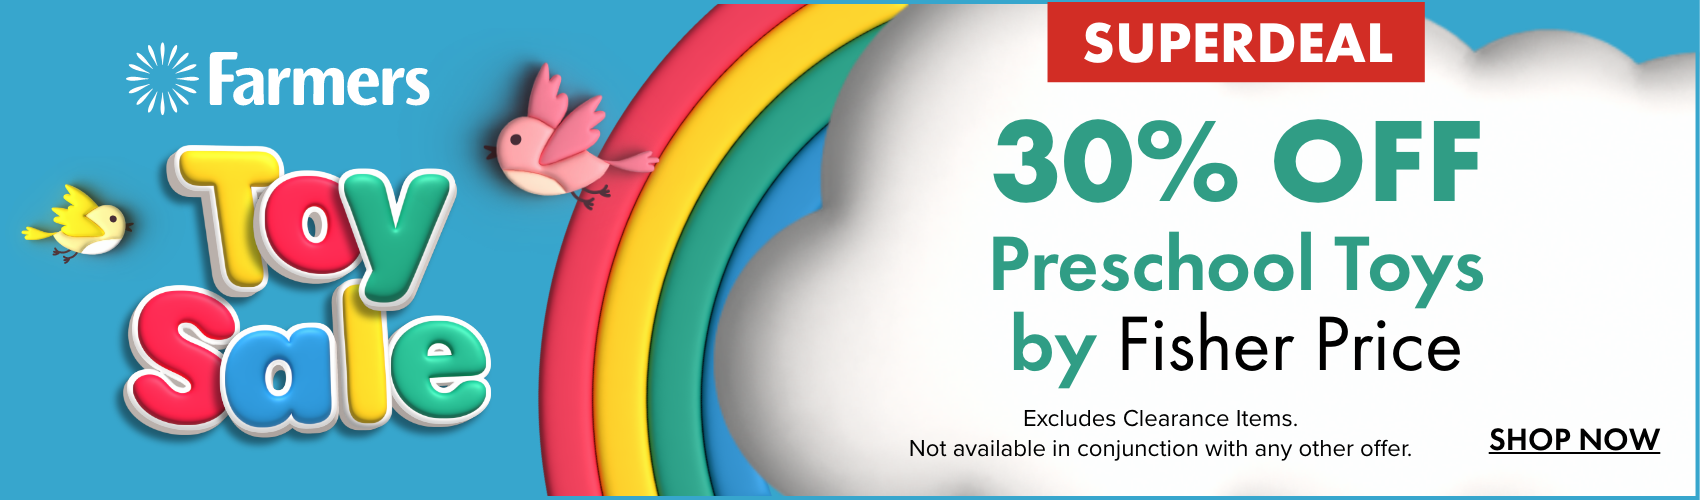 30% OFF Preschool Toys by Fisher Price